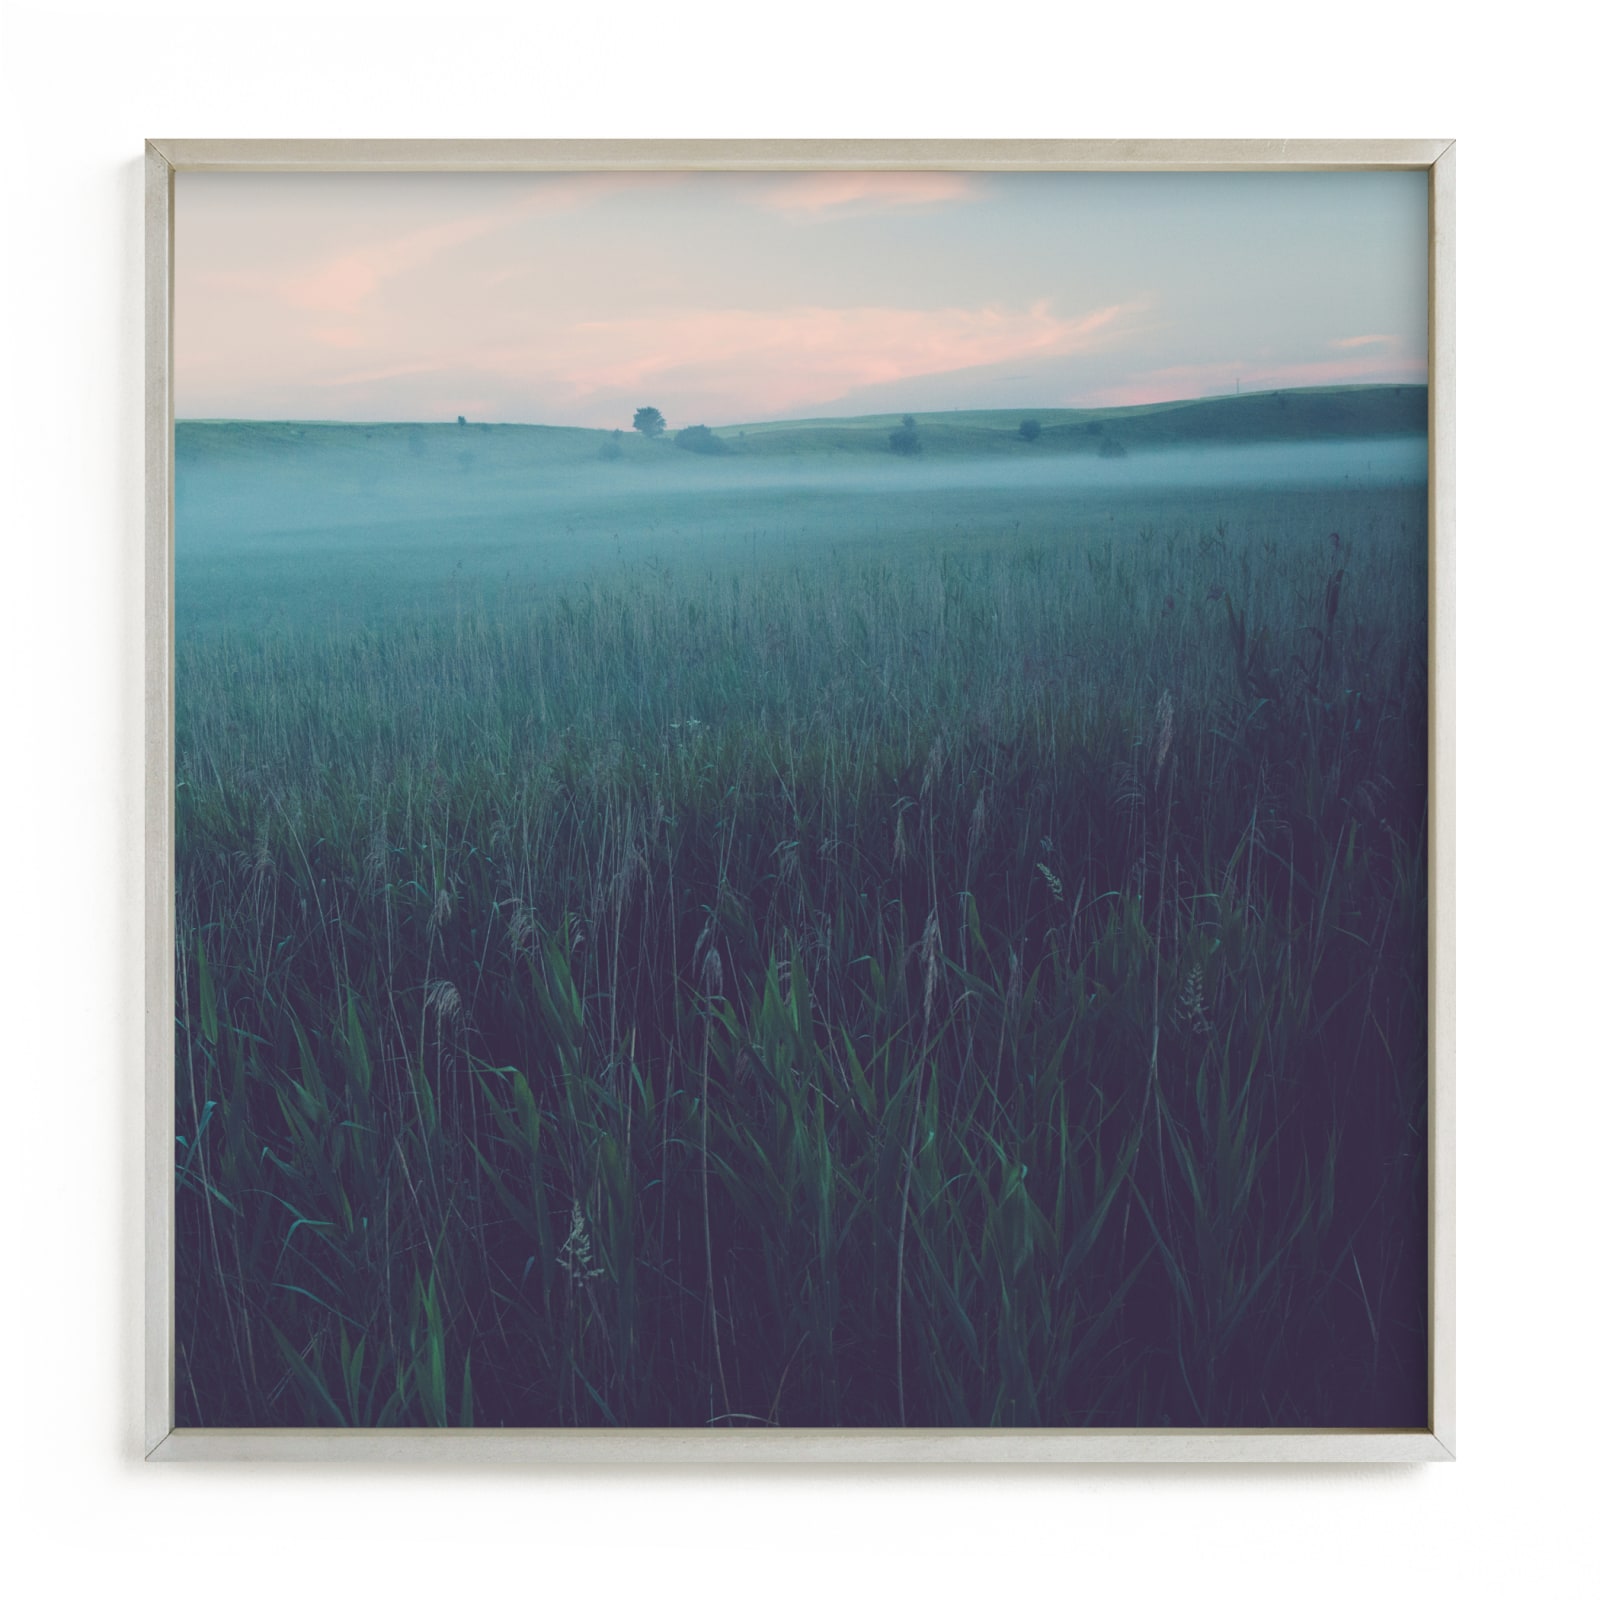 "MYSTERY TRIPTYCH COLOR III" by Lying on the grass in beautiful frame options and a variety of sizes.